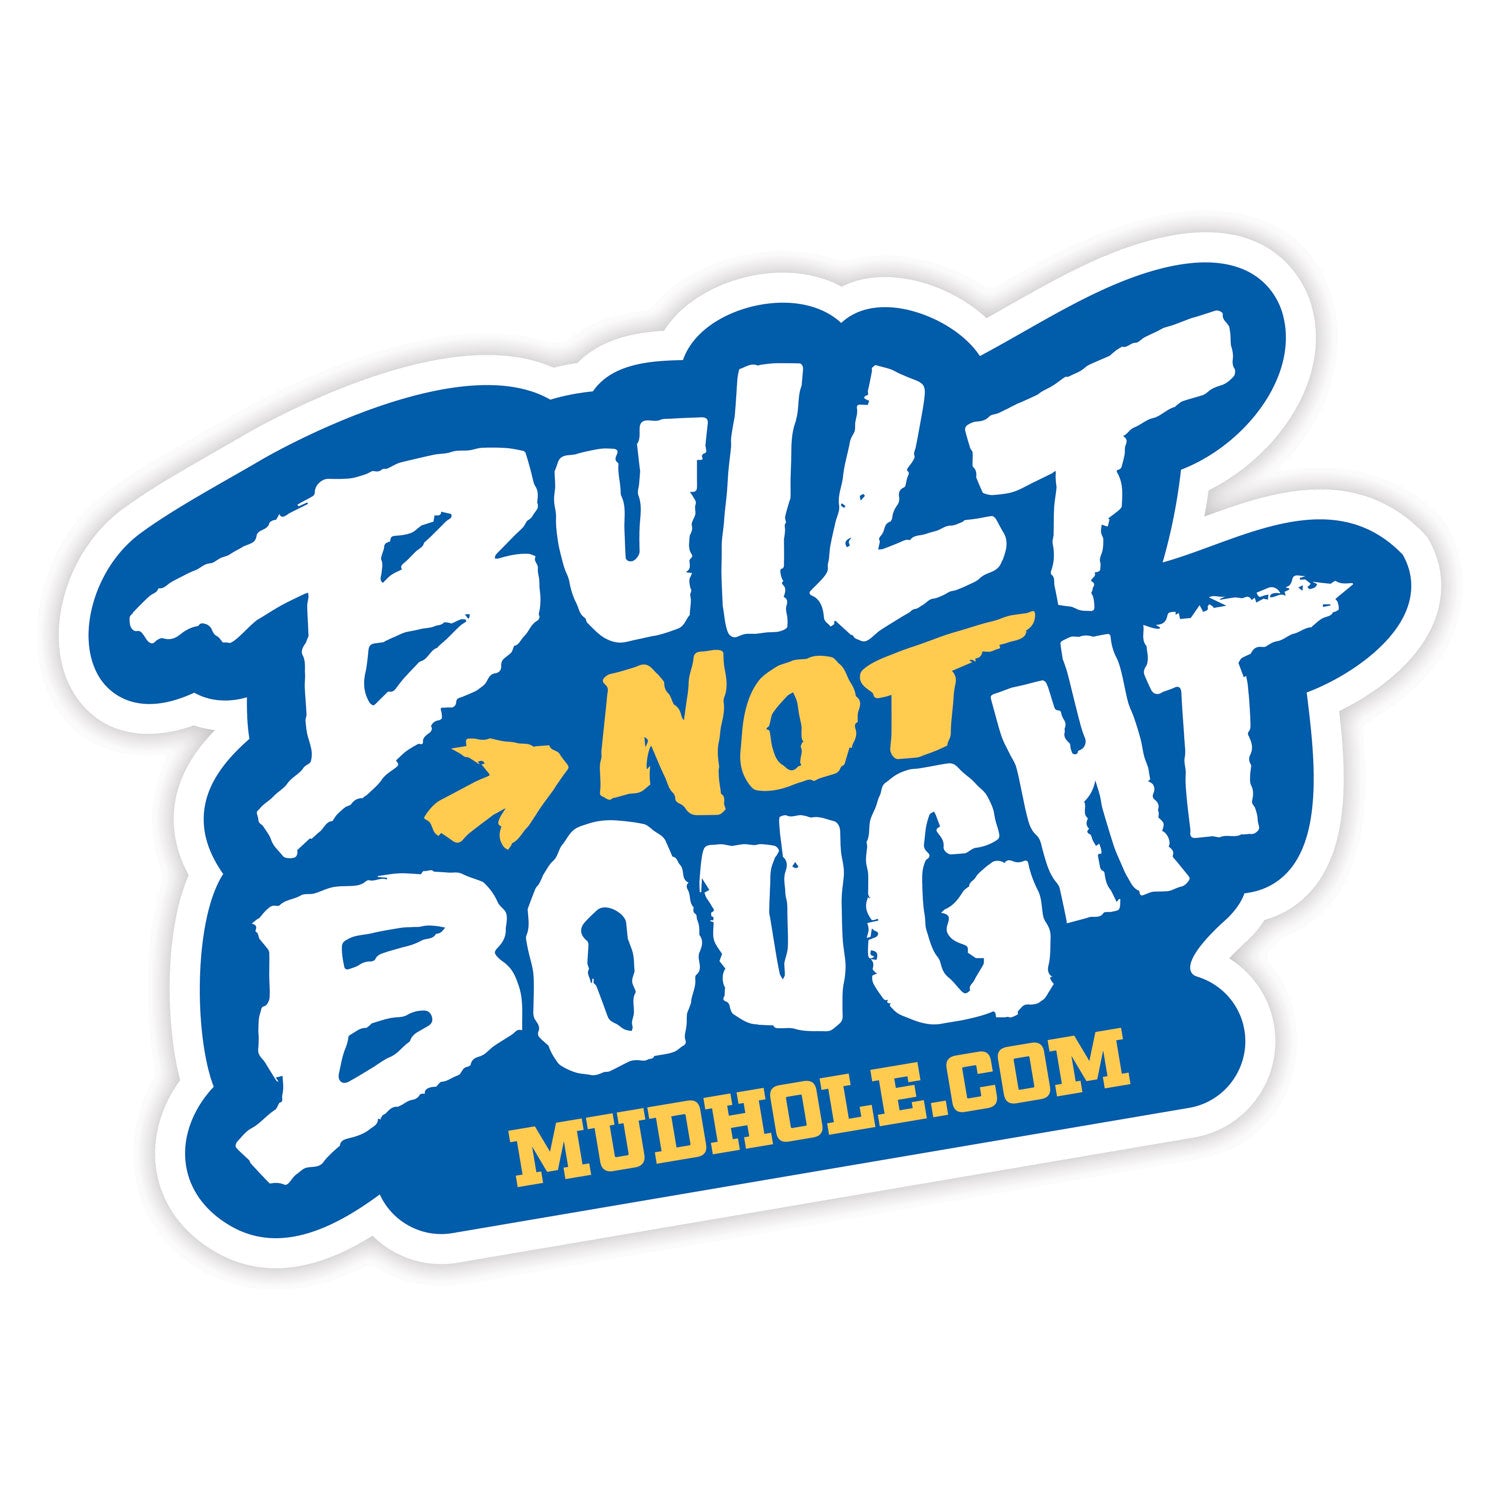 Mud Hole "Built Not Bought" Boat & Truck Decal